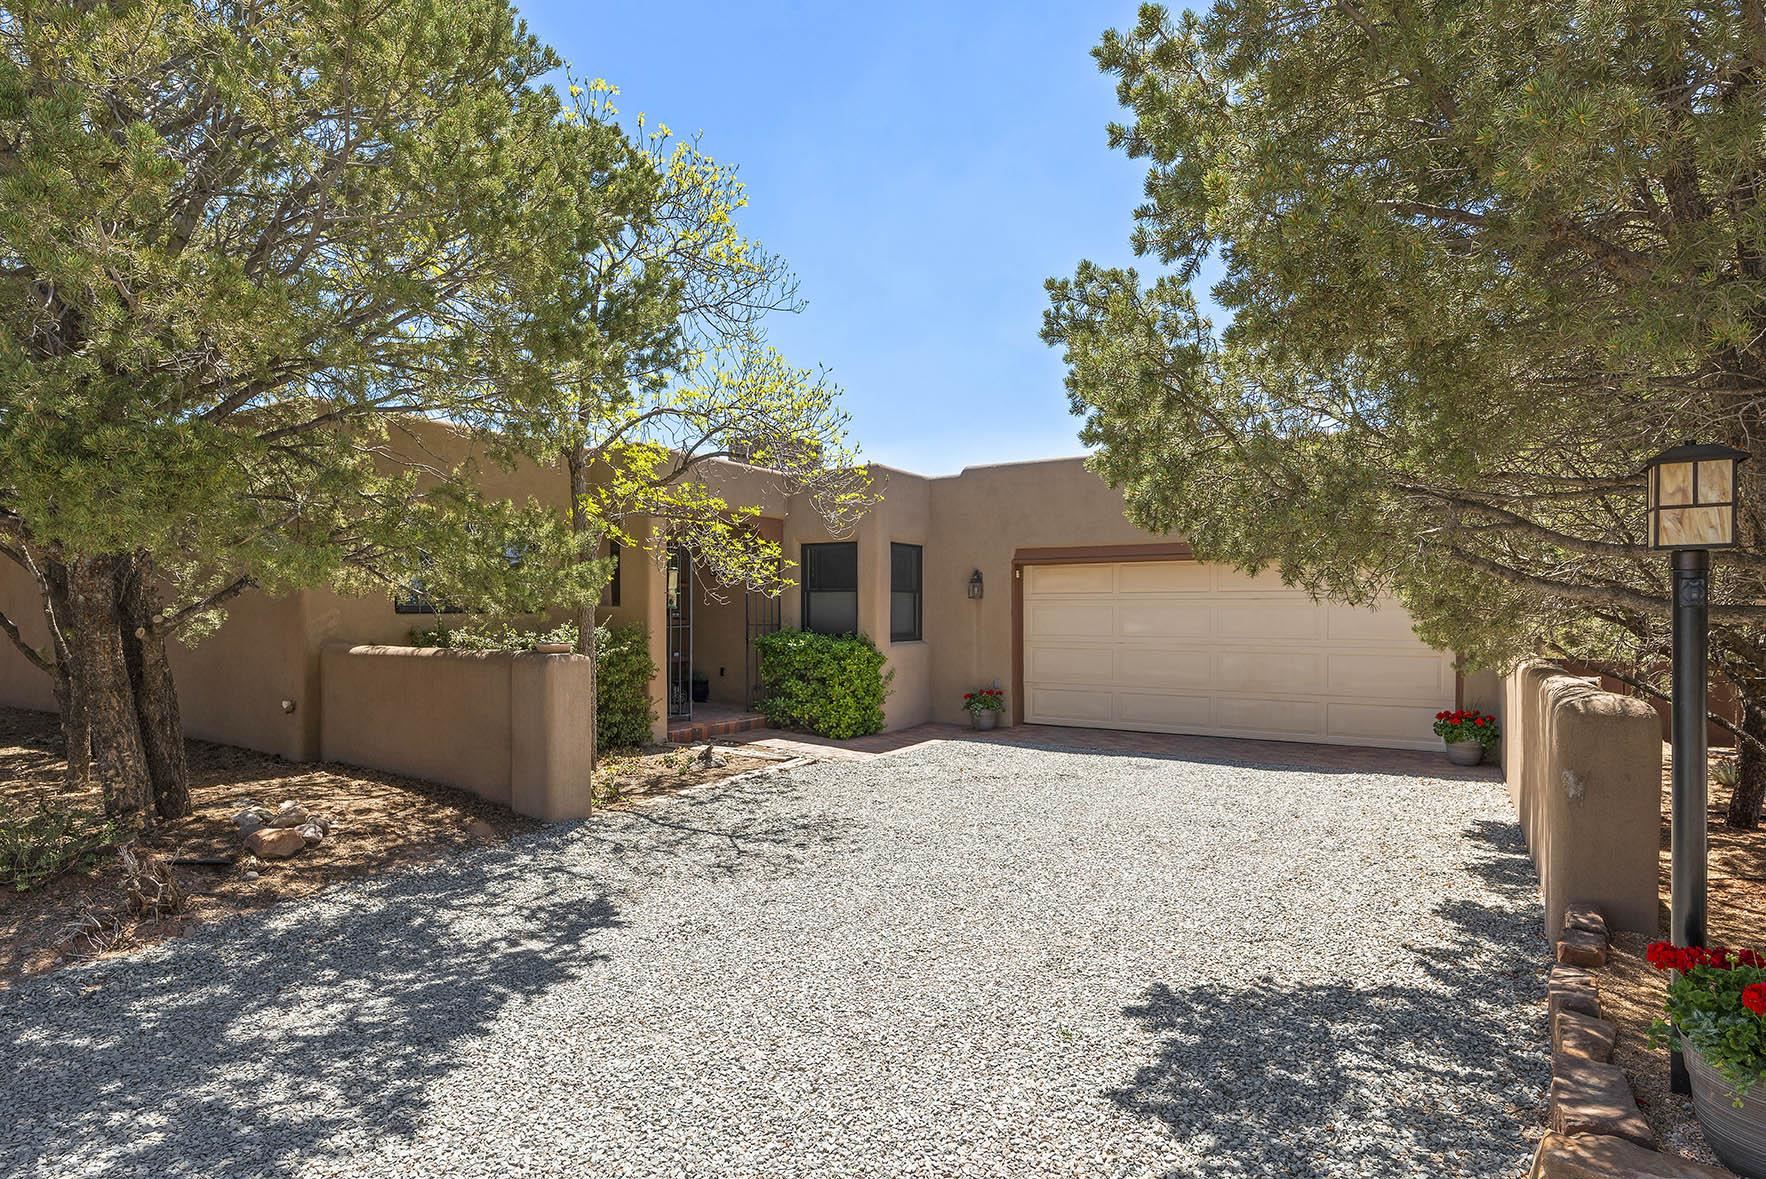 374 CALLE COLINA, Santa Fe, New Mexico 87501, 2 Bedrooms Bedrooms, ,2 BathroomsBathrooms,Residential,For Sale,374 CALLE COLINA,202201644